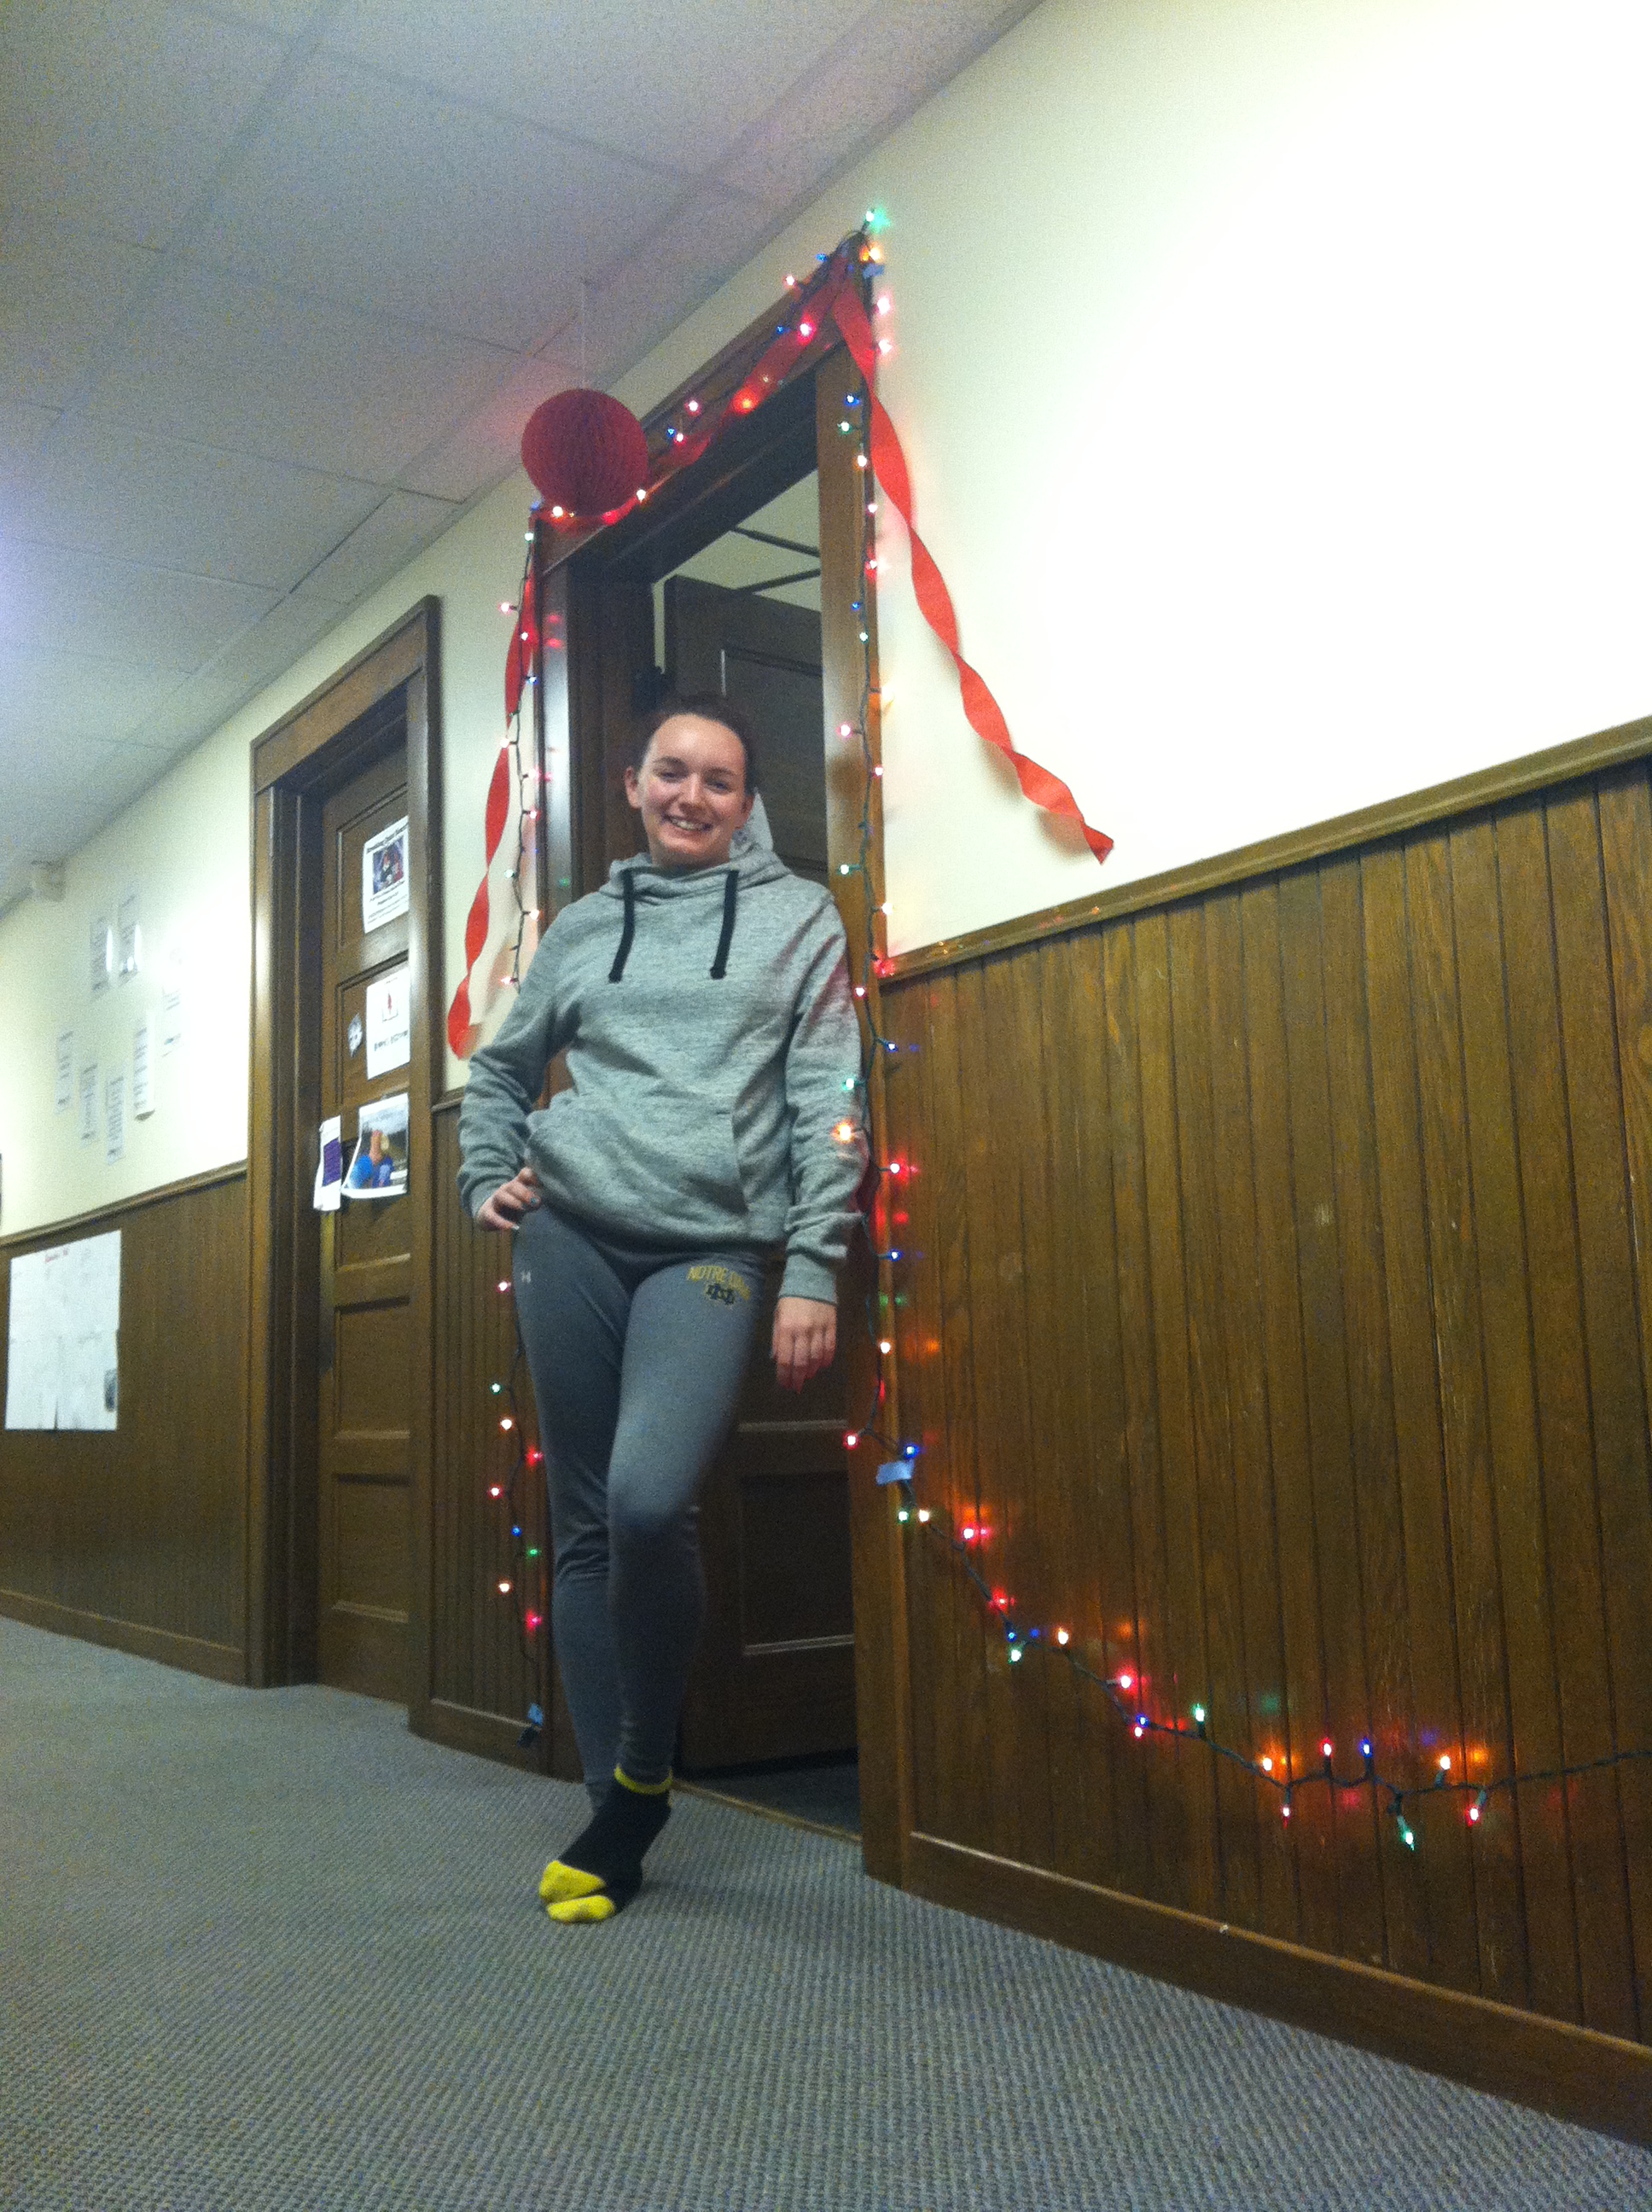 My roommate, Kristin, in front of Ashley and Abby's door with their colorful Christmas lights.